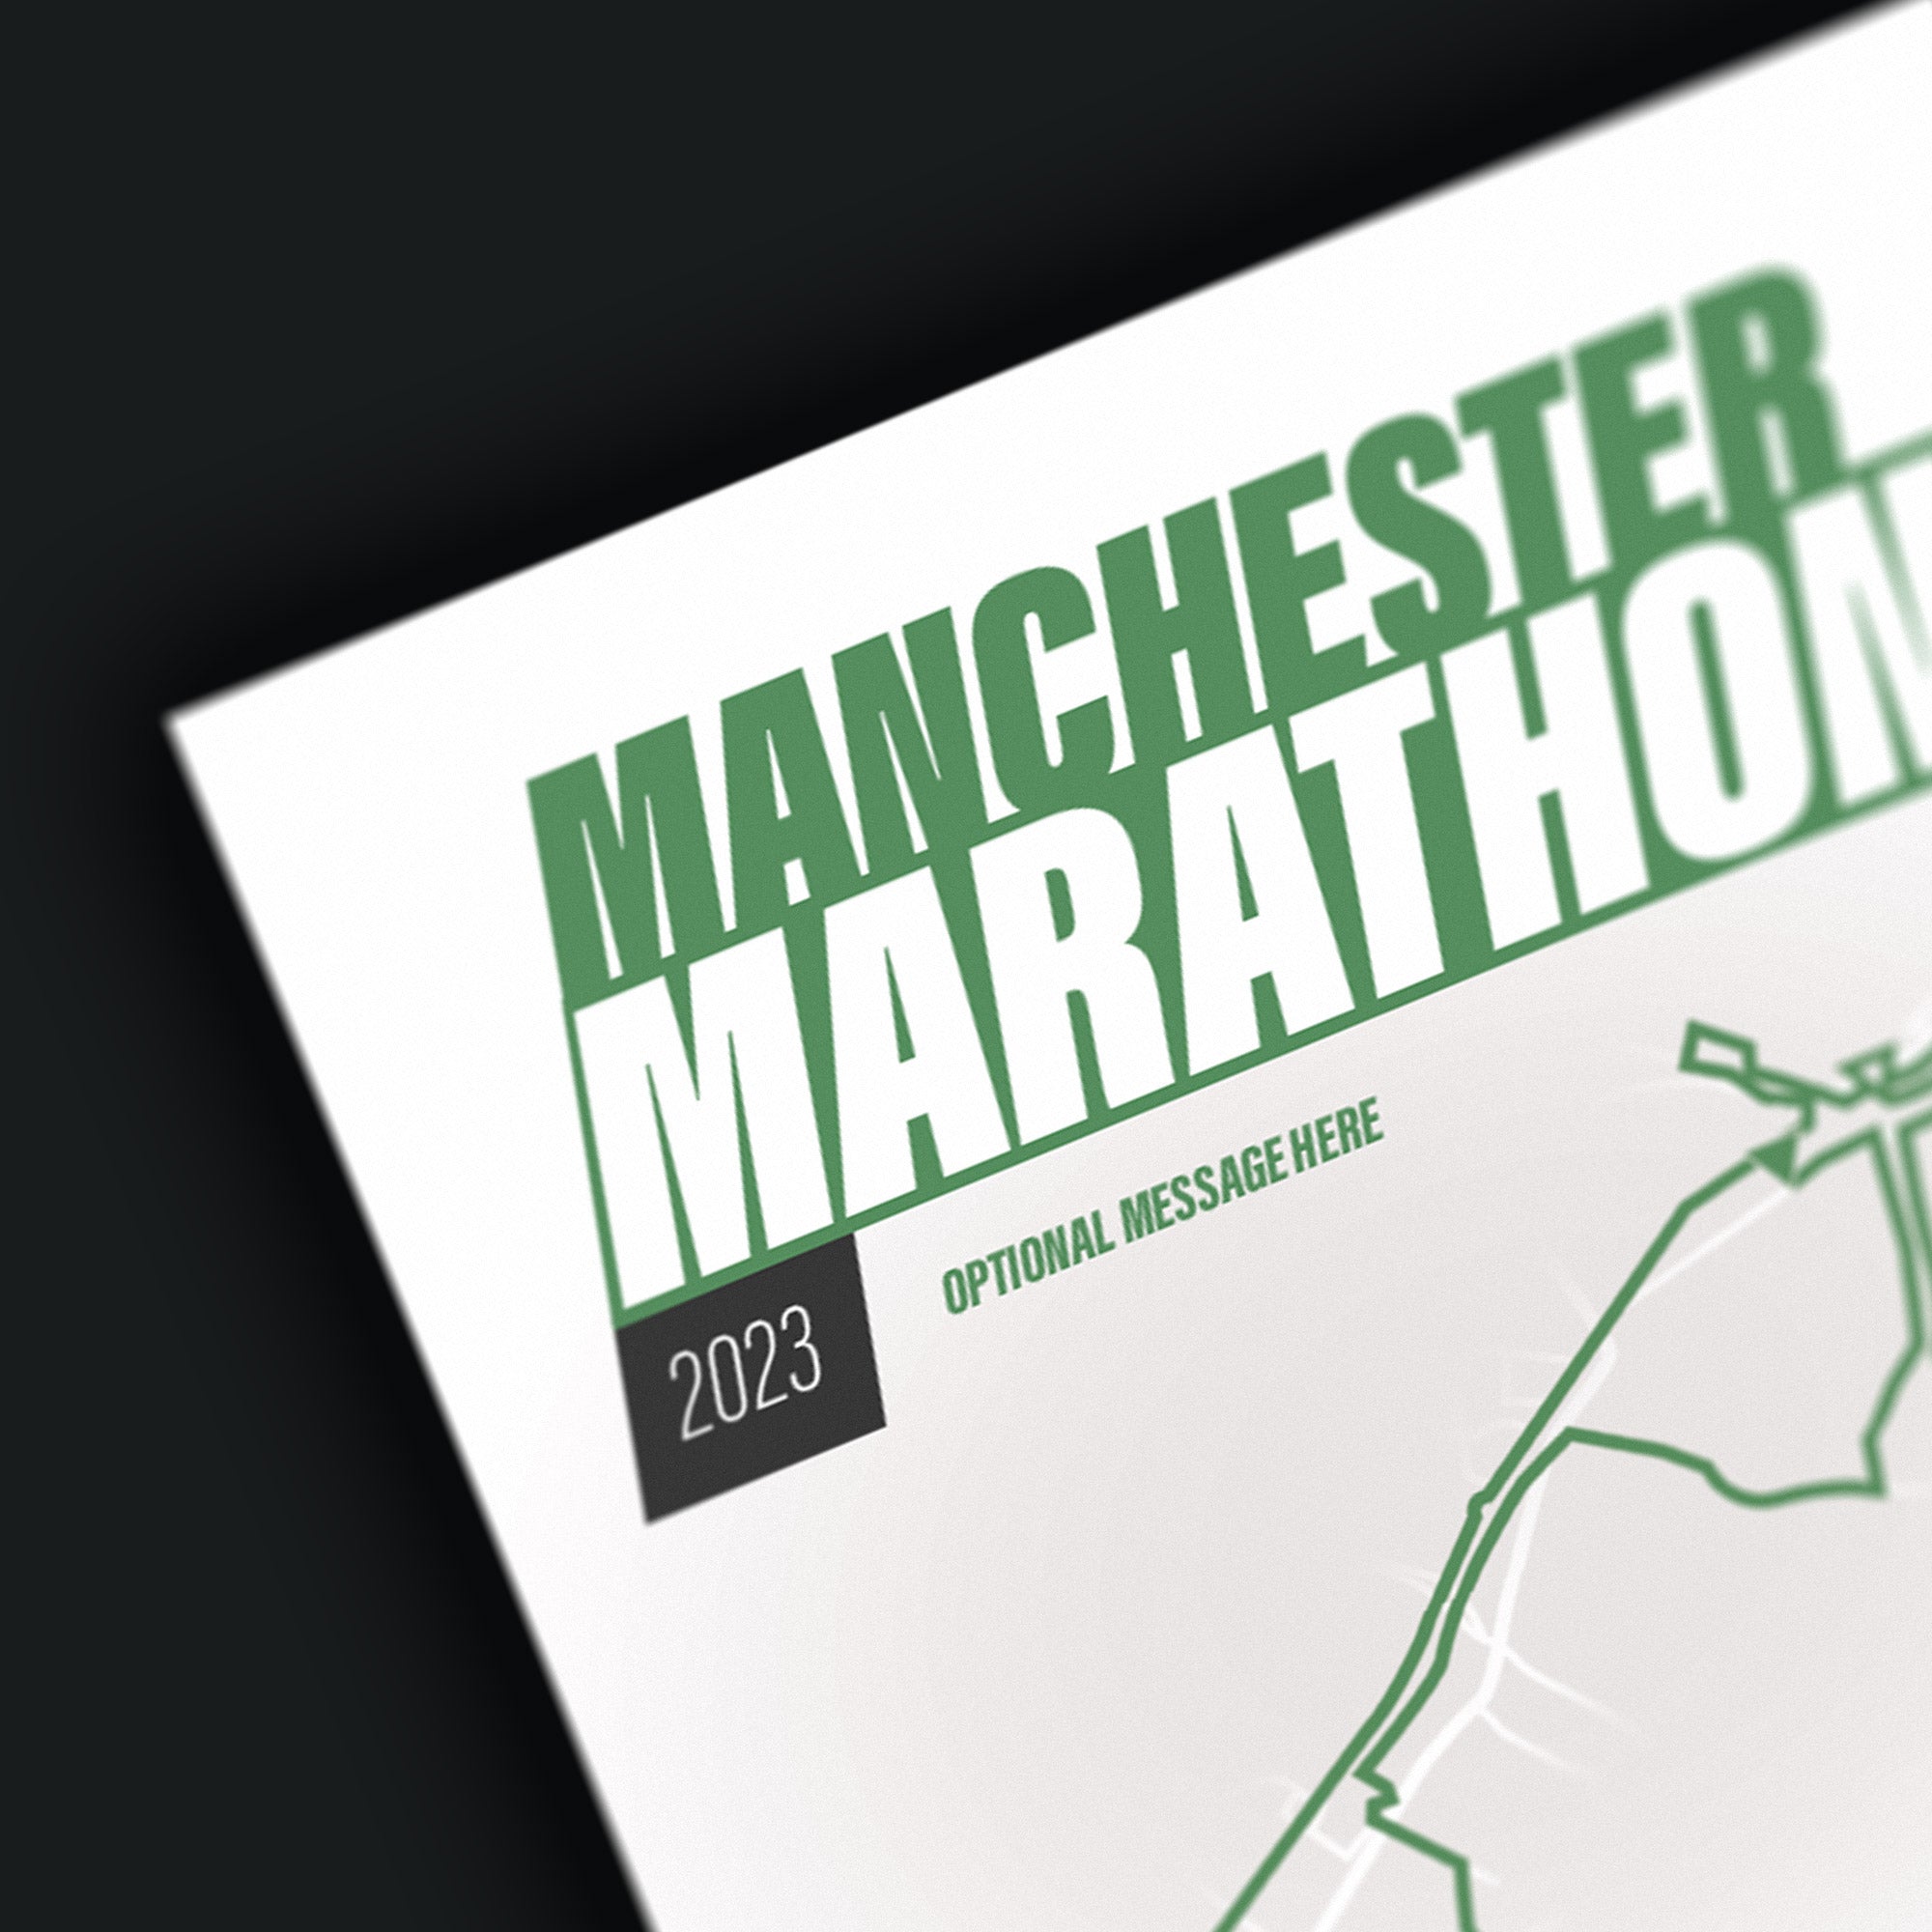 PERSONALISED 'Amazing Pace' Manchester Marathon Finishers Print Good Team On Paper